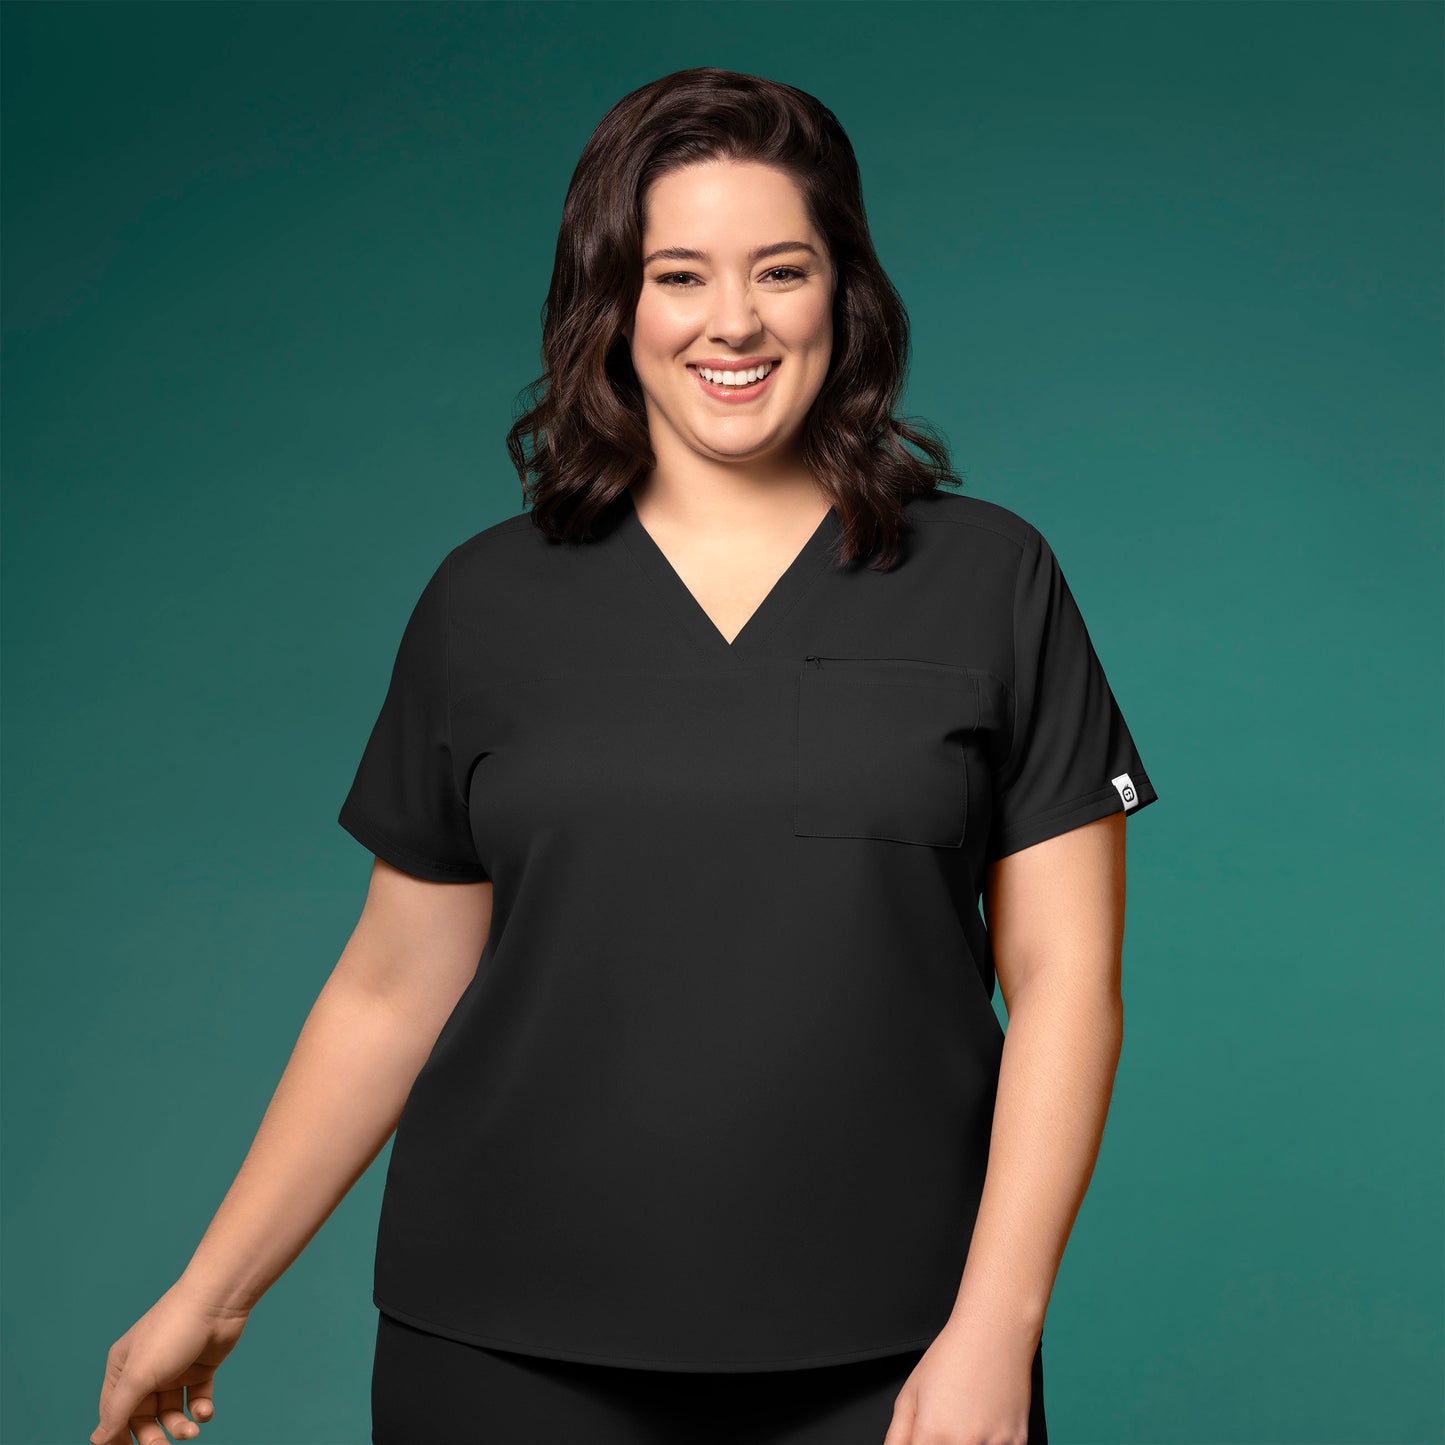 Shop Tuck-In Scrub Tops Online - Stay Comfortable All Day